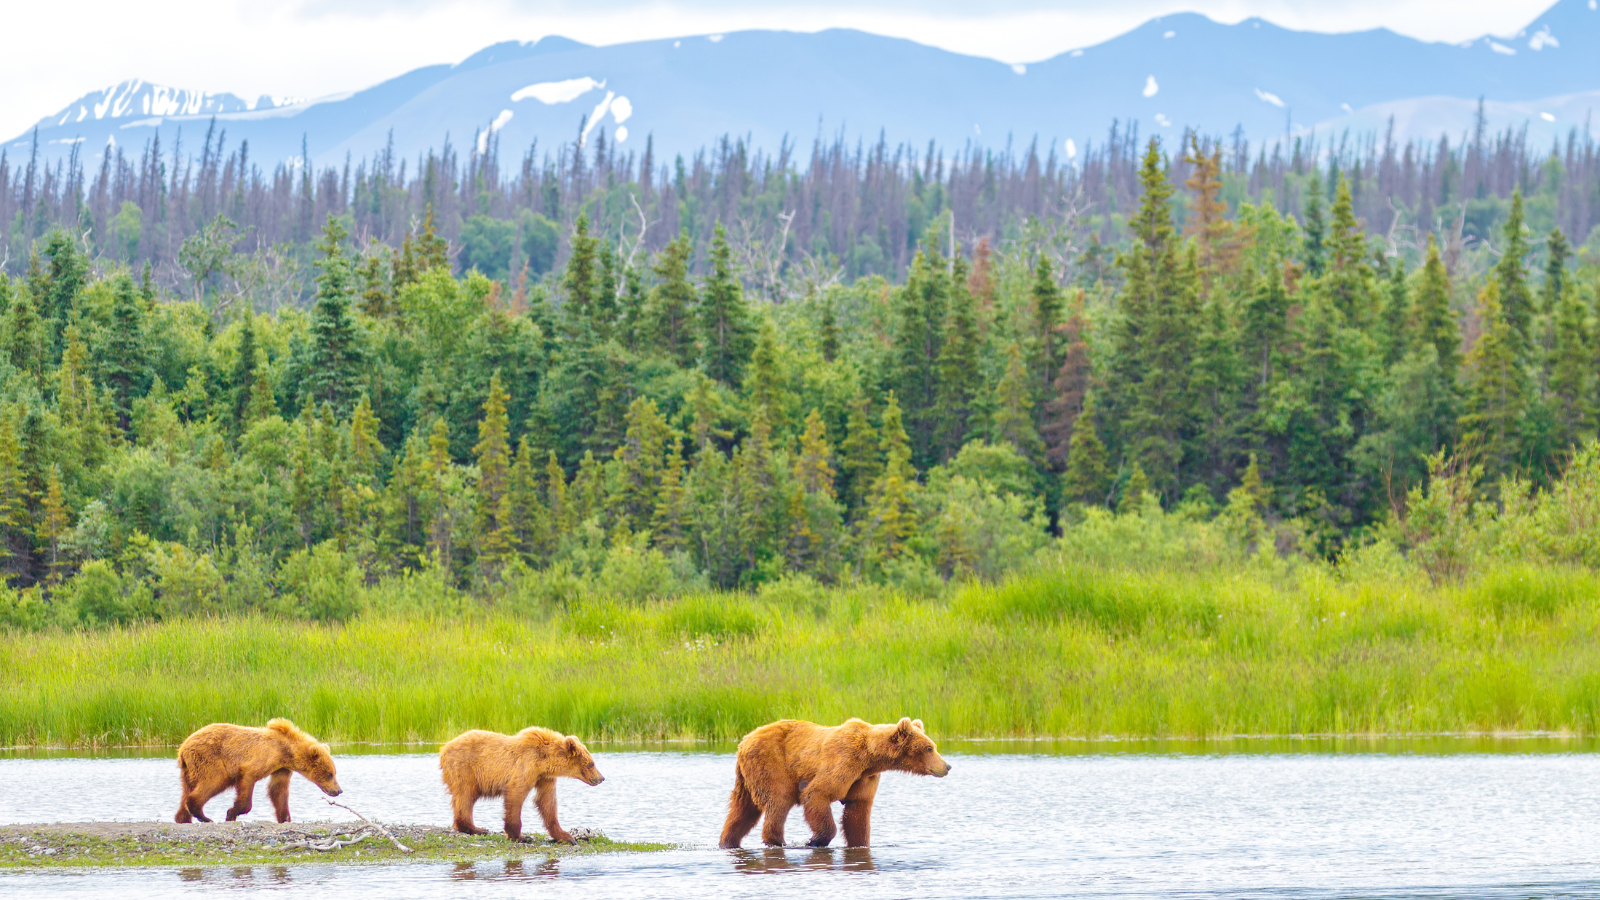 How to Get to Katmai National Park From Homer, Alaska - Land's End